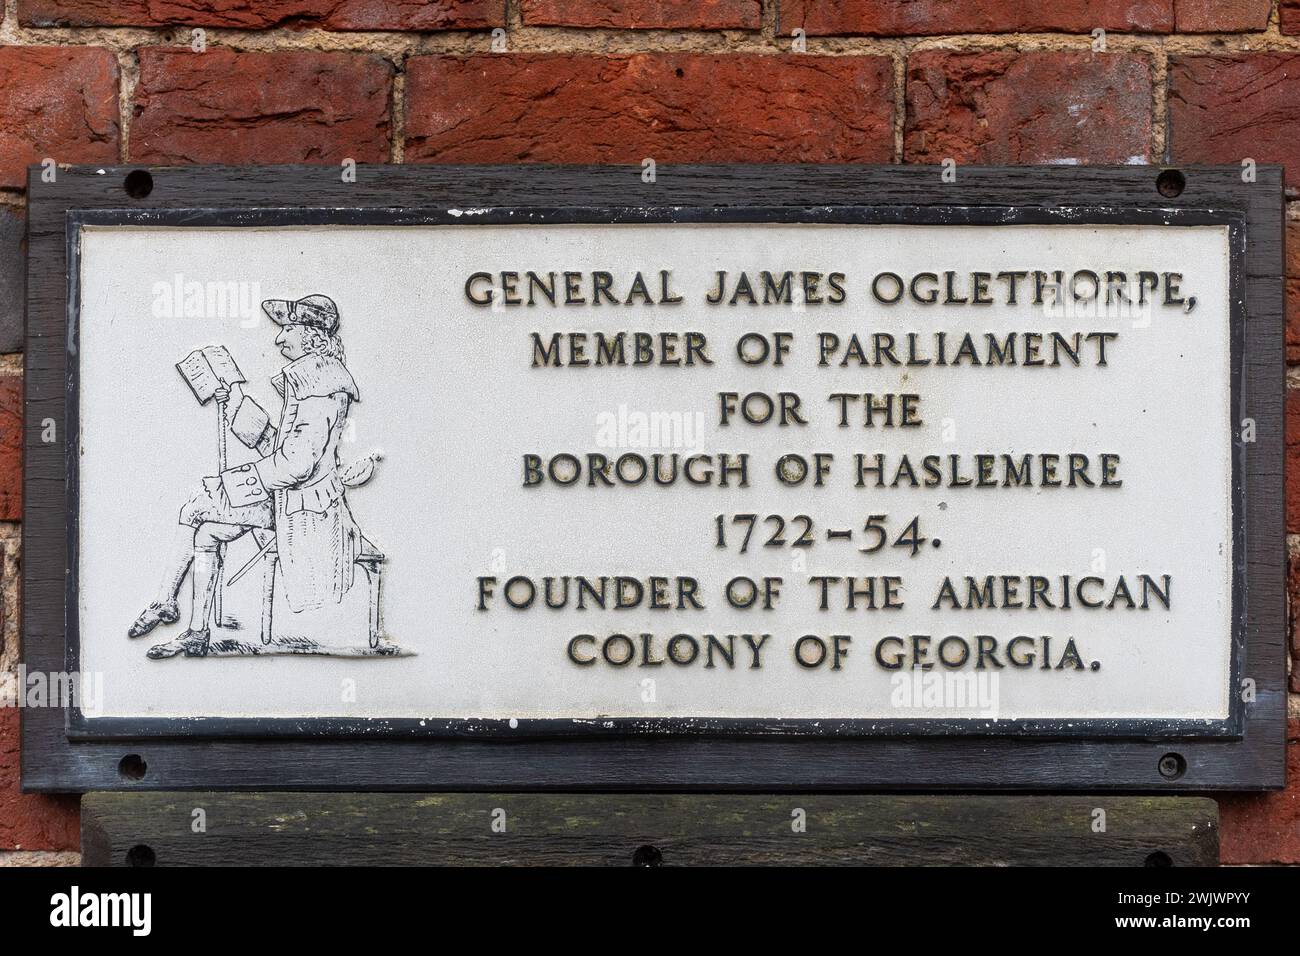 Commemorative plaque on Haslemere town hall remembering General James Oglethorpe, local member of parliament and founder of American colony of Georgia Stock Photo